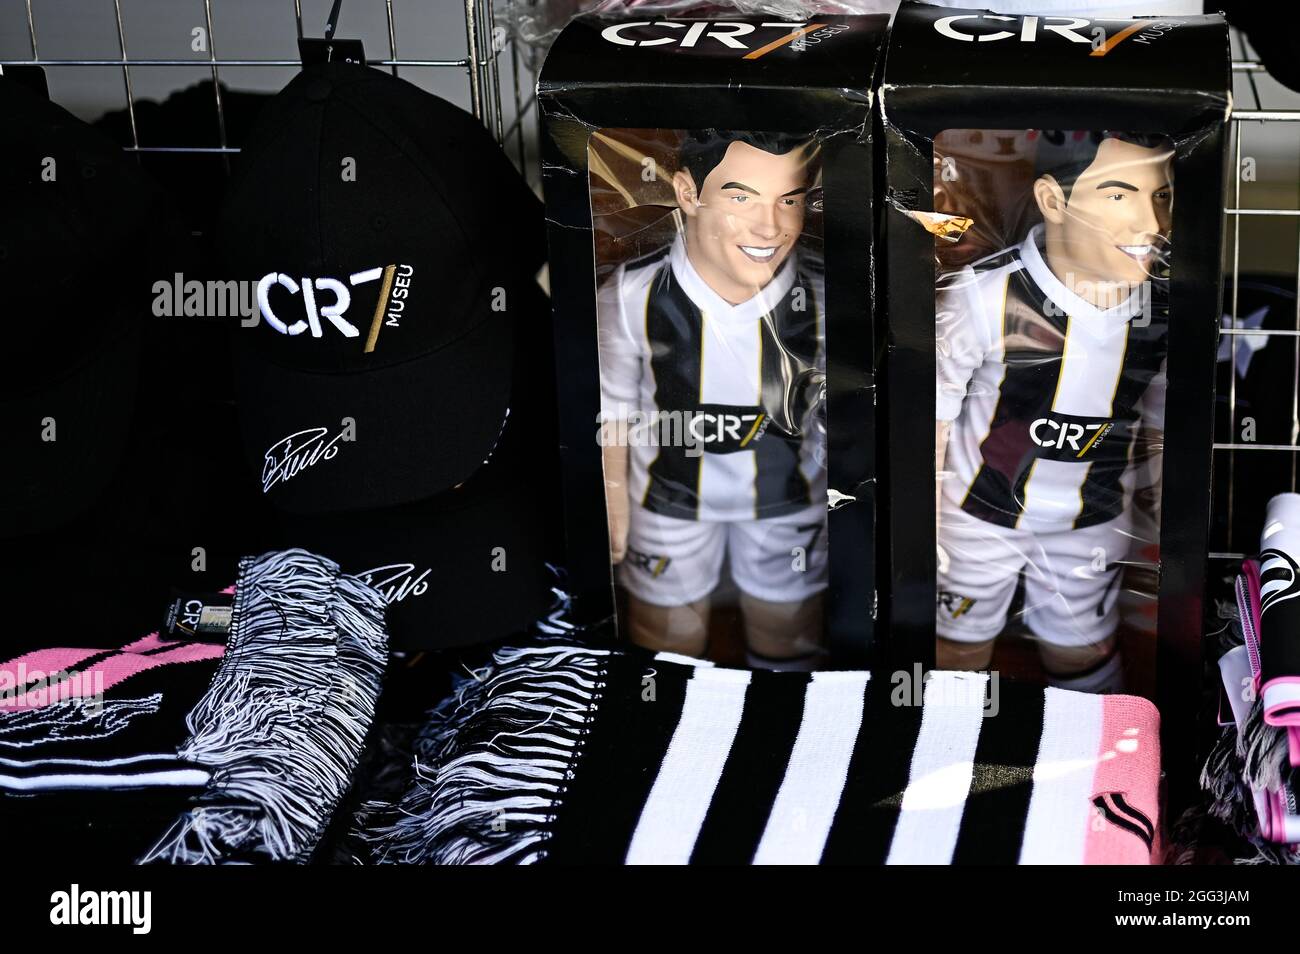 Turin, Italy. 28 August 2021. Two action figures of Cristiano Ronaldo are seen outside Allianz Stadium. Cristiano Ronaldo left Juventus FC on August 27 during summer transfer window to join Manchester United FC. Credit: Nicolò Campo/Alamy Live News Stock Photo